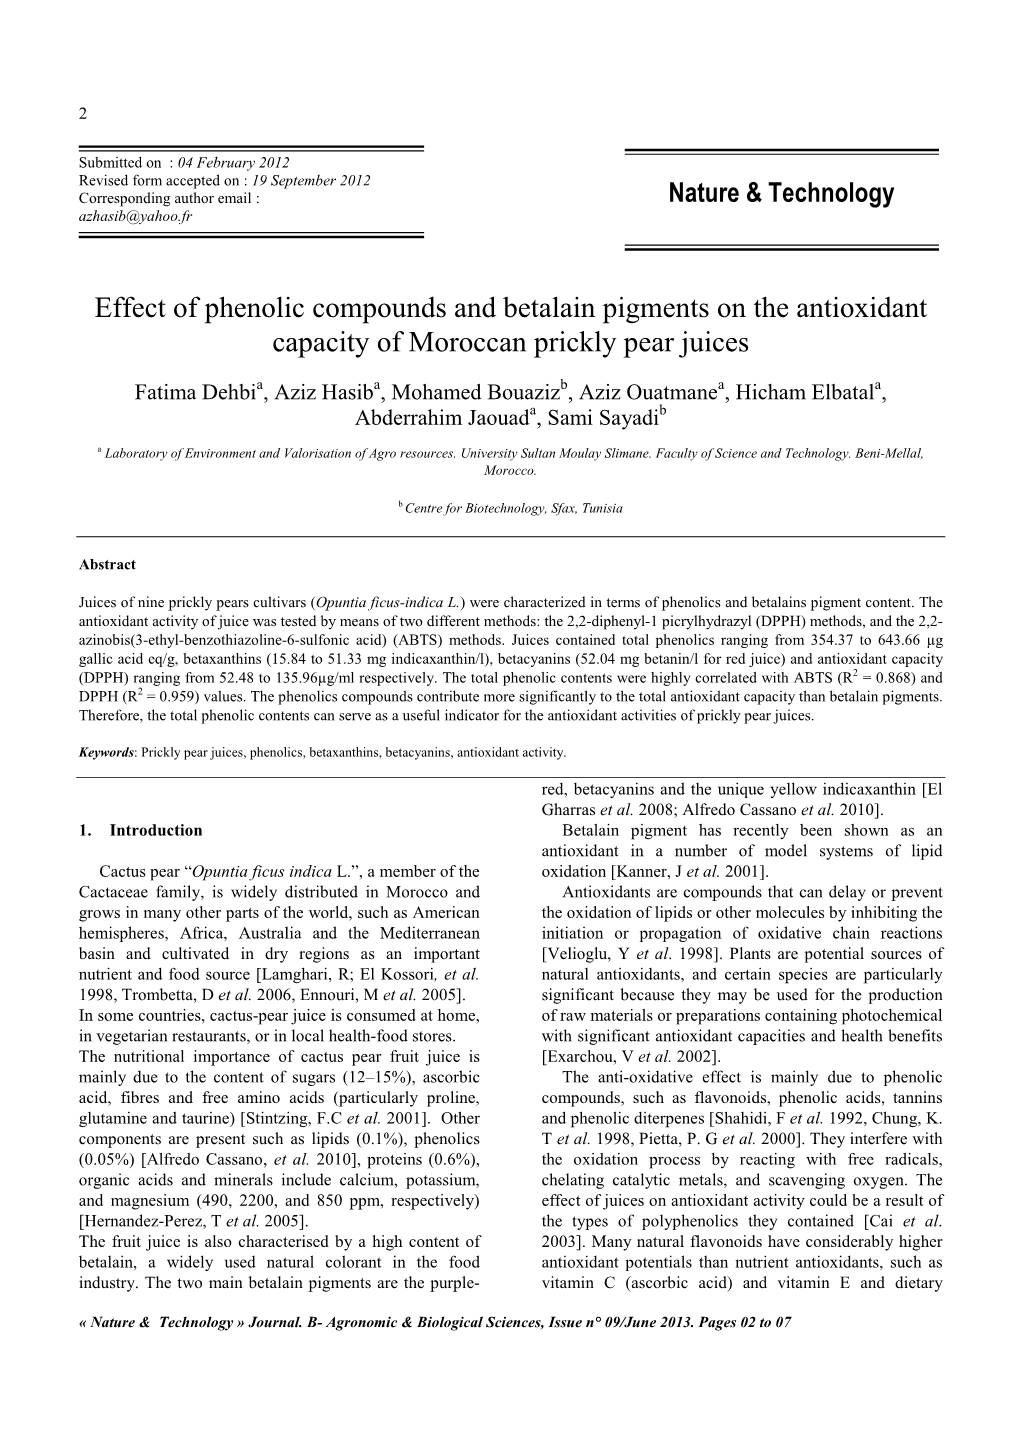 Effect of Phenolic Compounds and Betalain Pigments on the Antioxidant Capacity of Moroccan Prickly Pear Juices